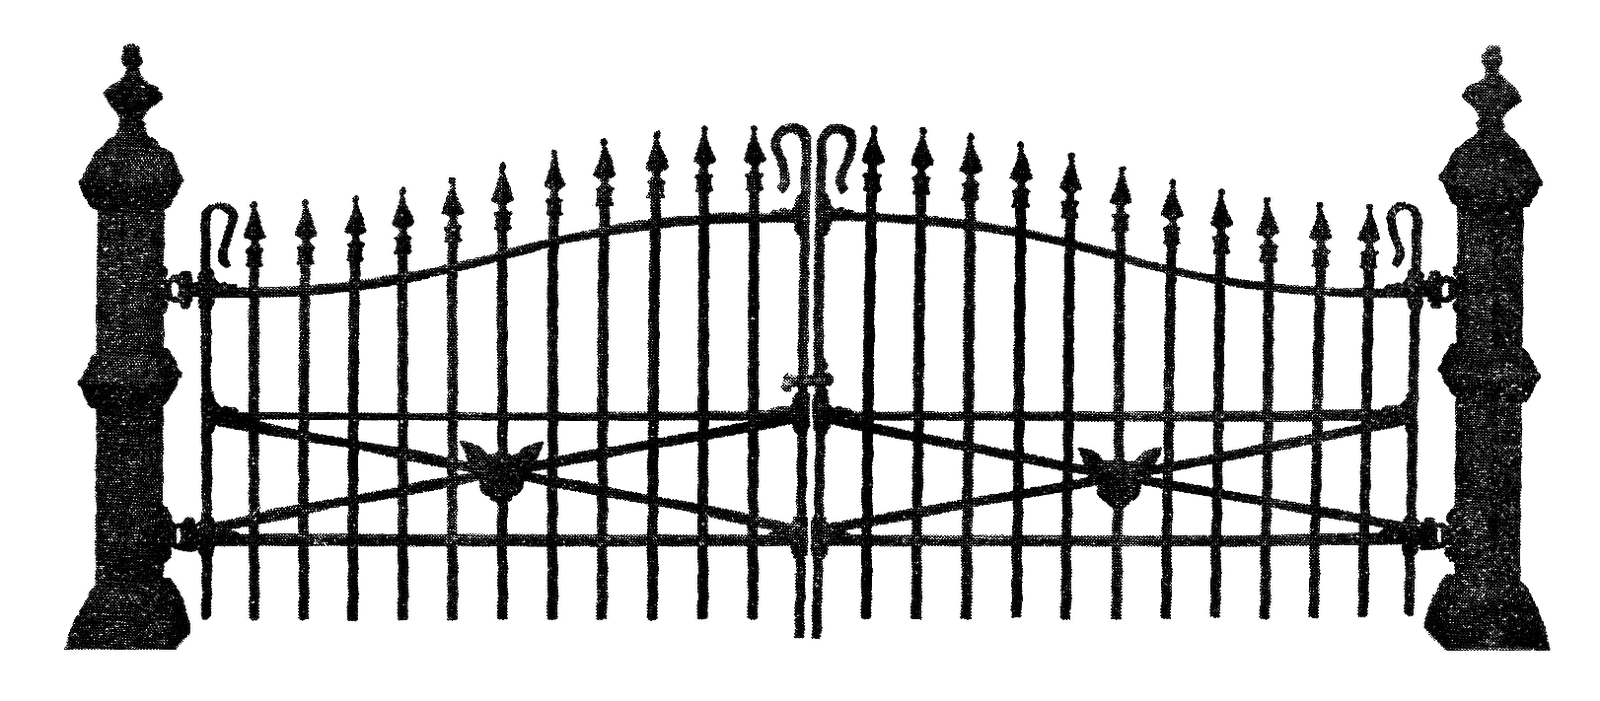 Spooky Wrought Iron Fence Illustration With Black Cat Head Design